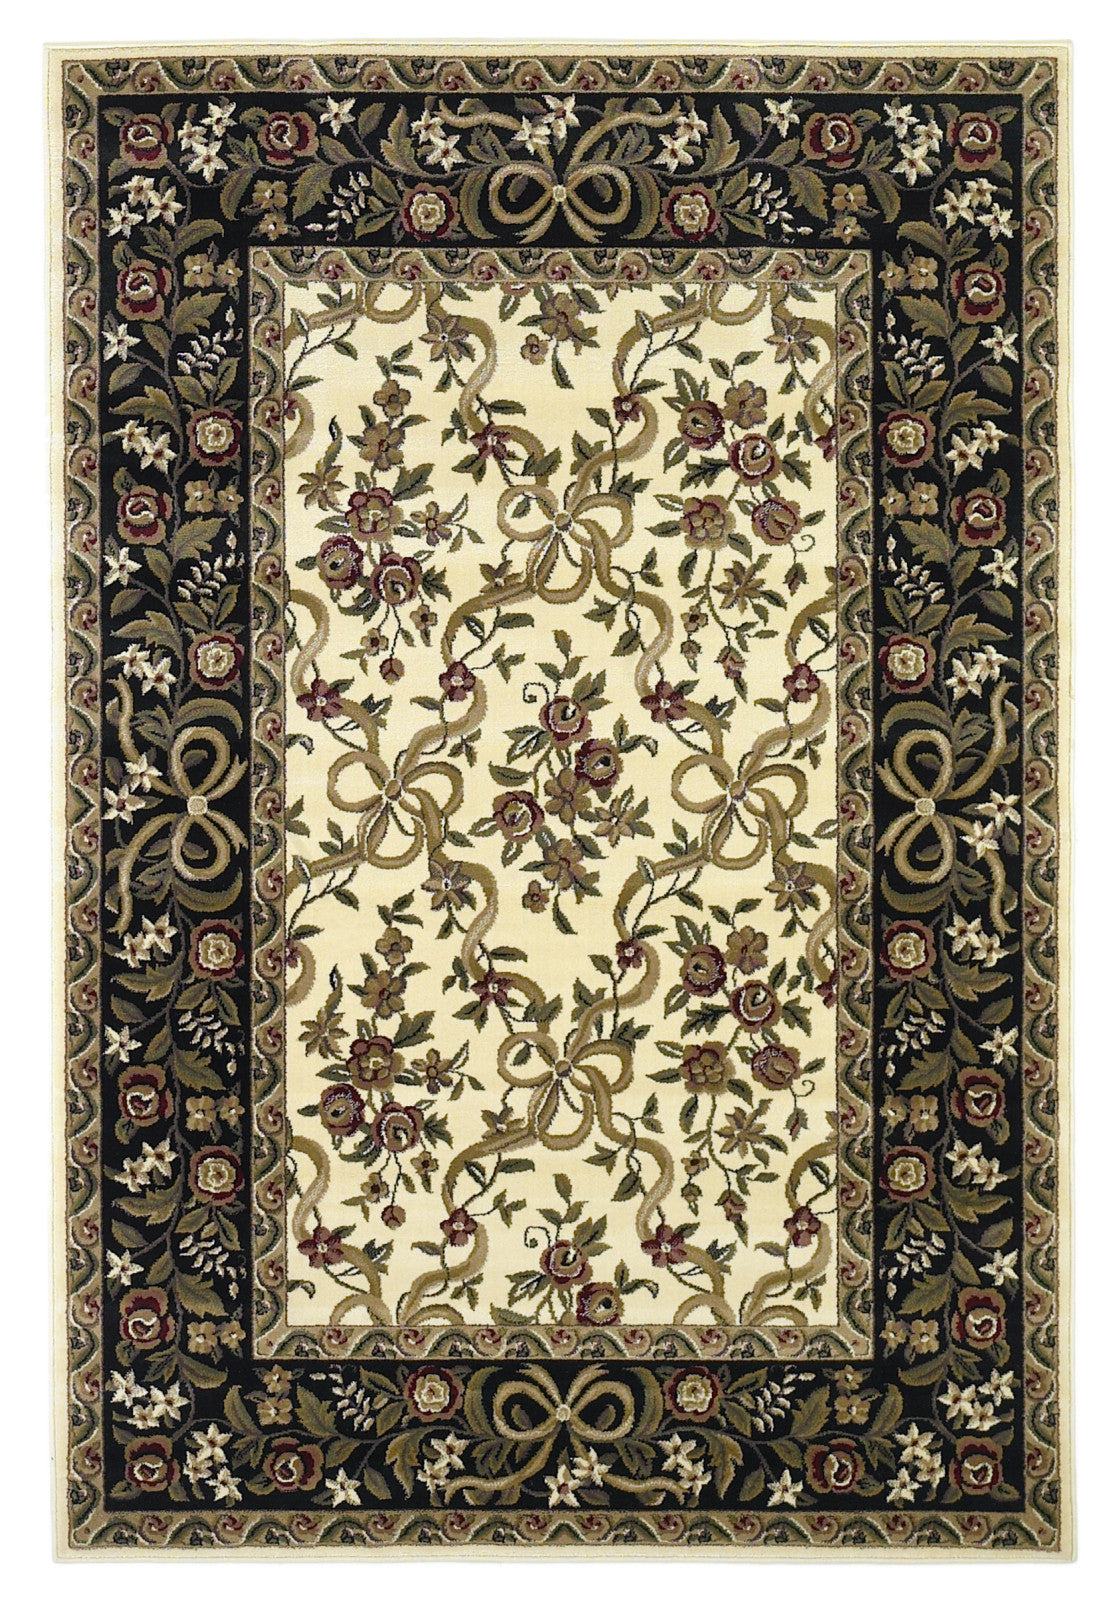 KAS Cambridge 7310 Ivory/Black Floral Ribbons Machine Woven Area Rug